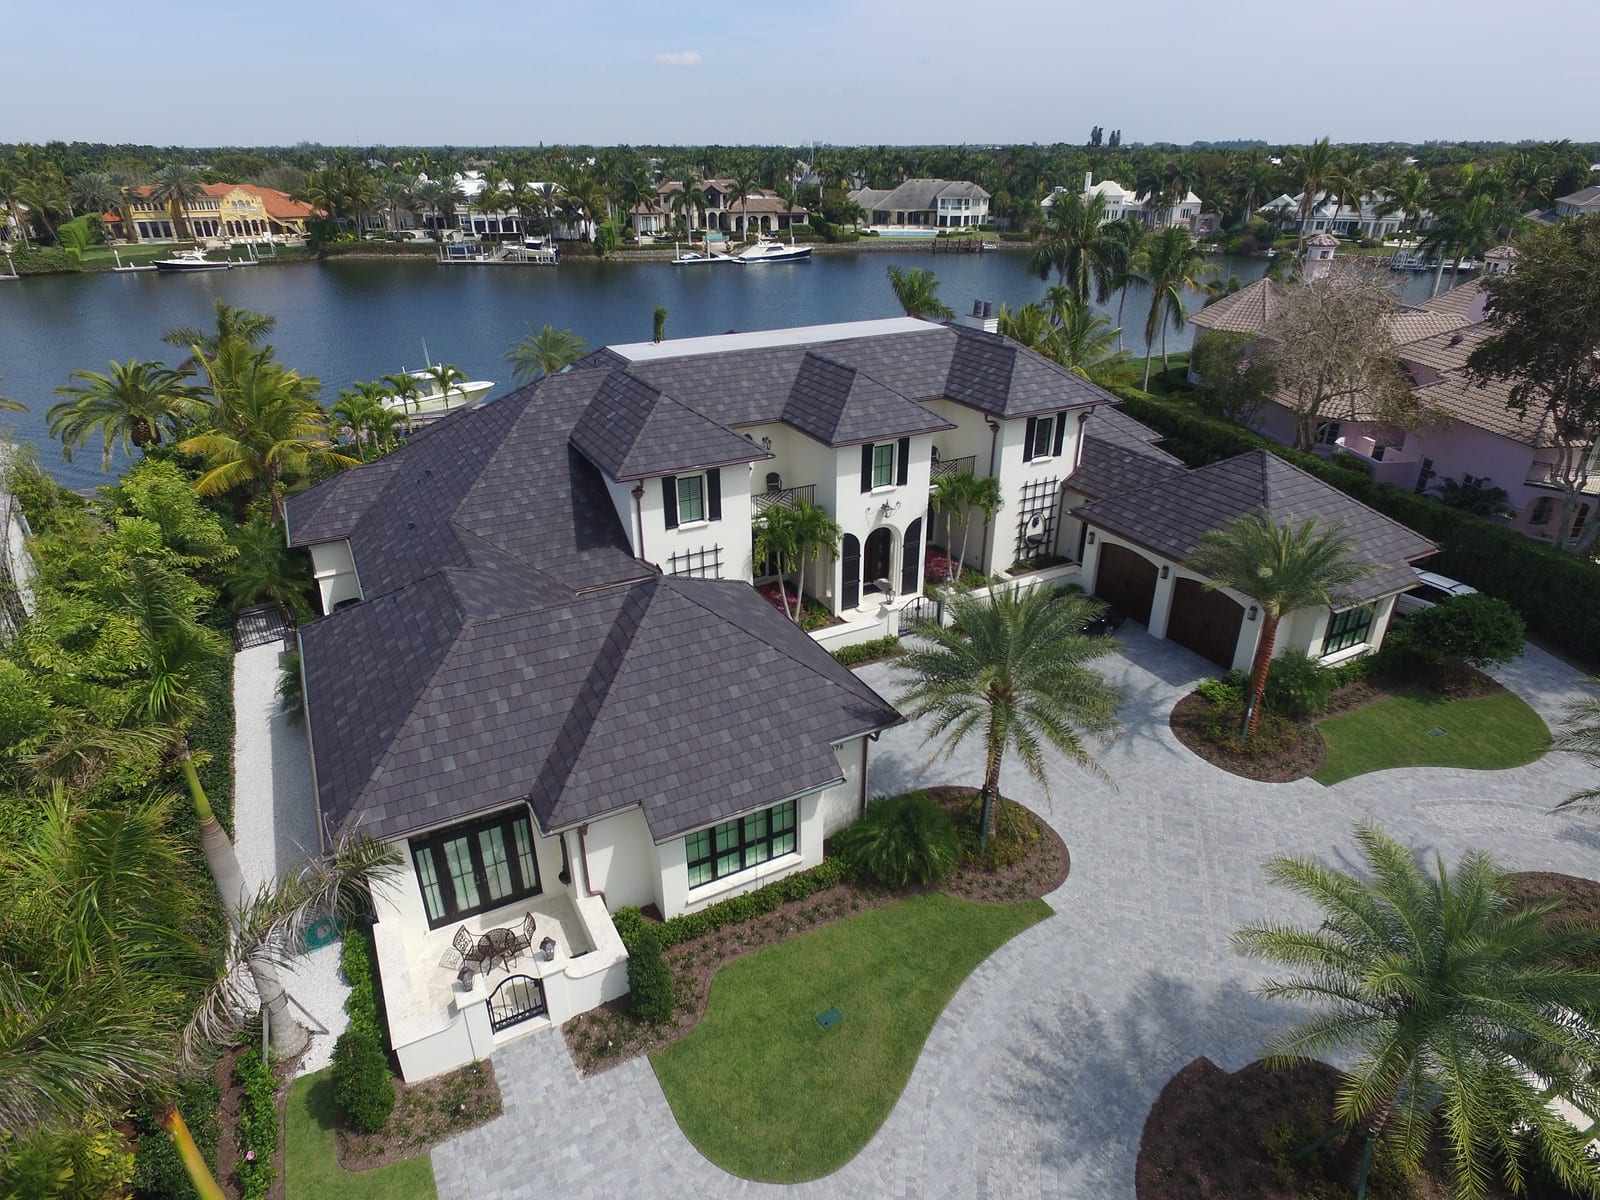 LudoSlate Naples, FL by Ludowici Roof Tile